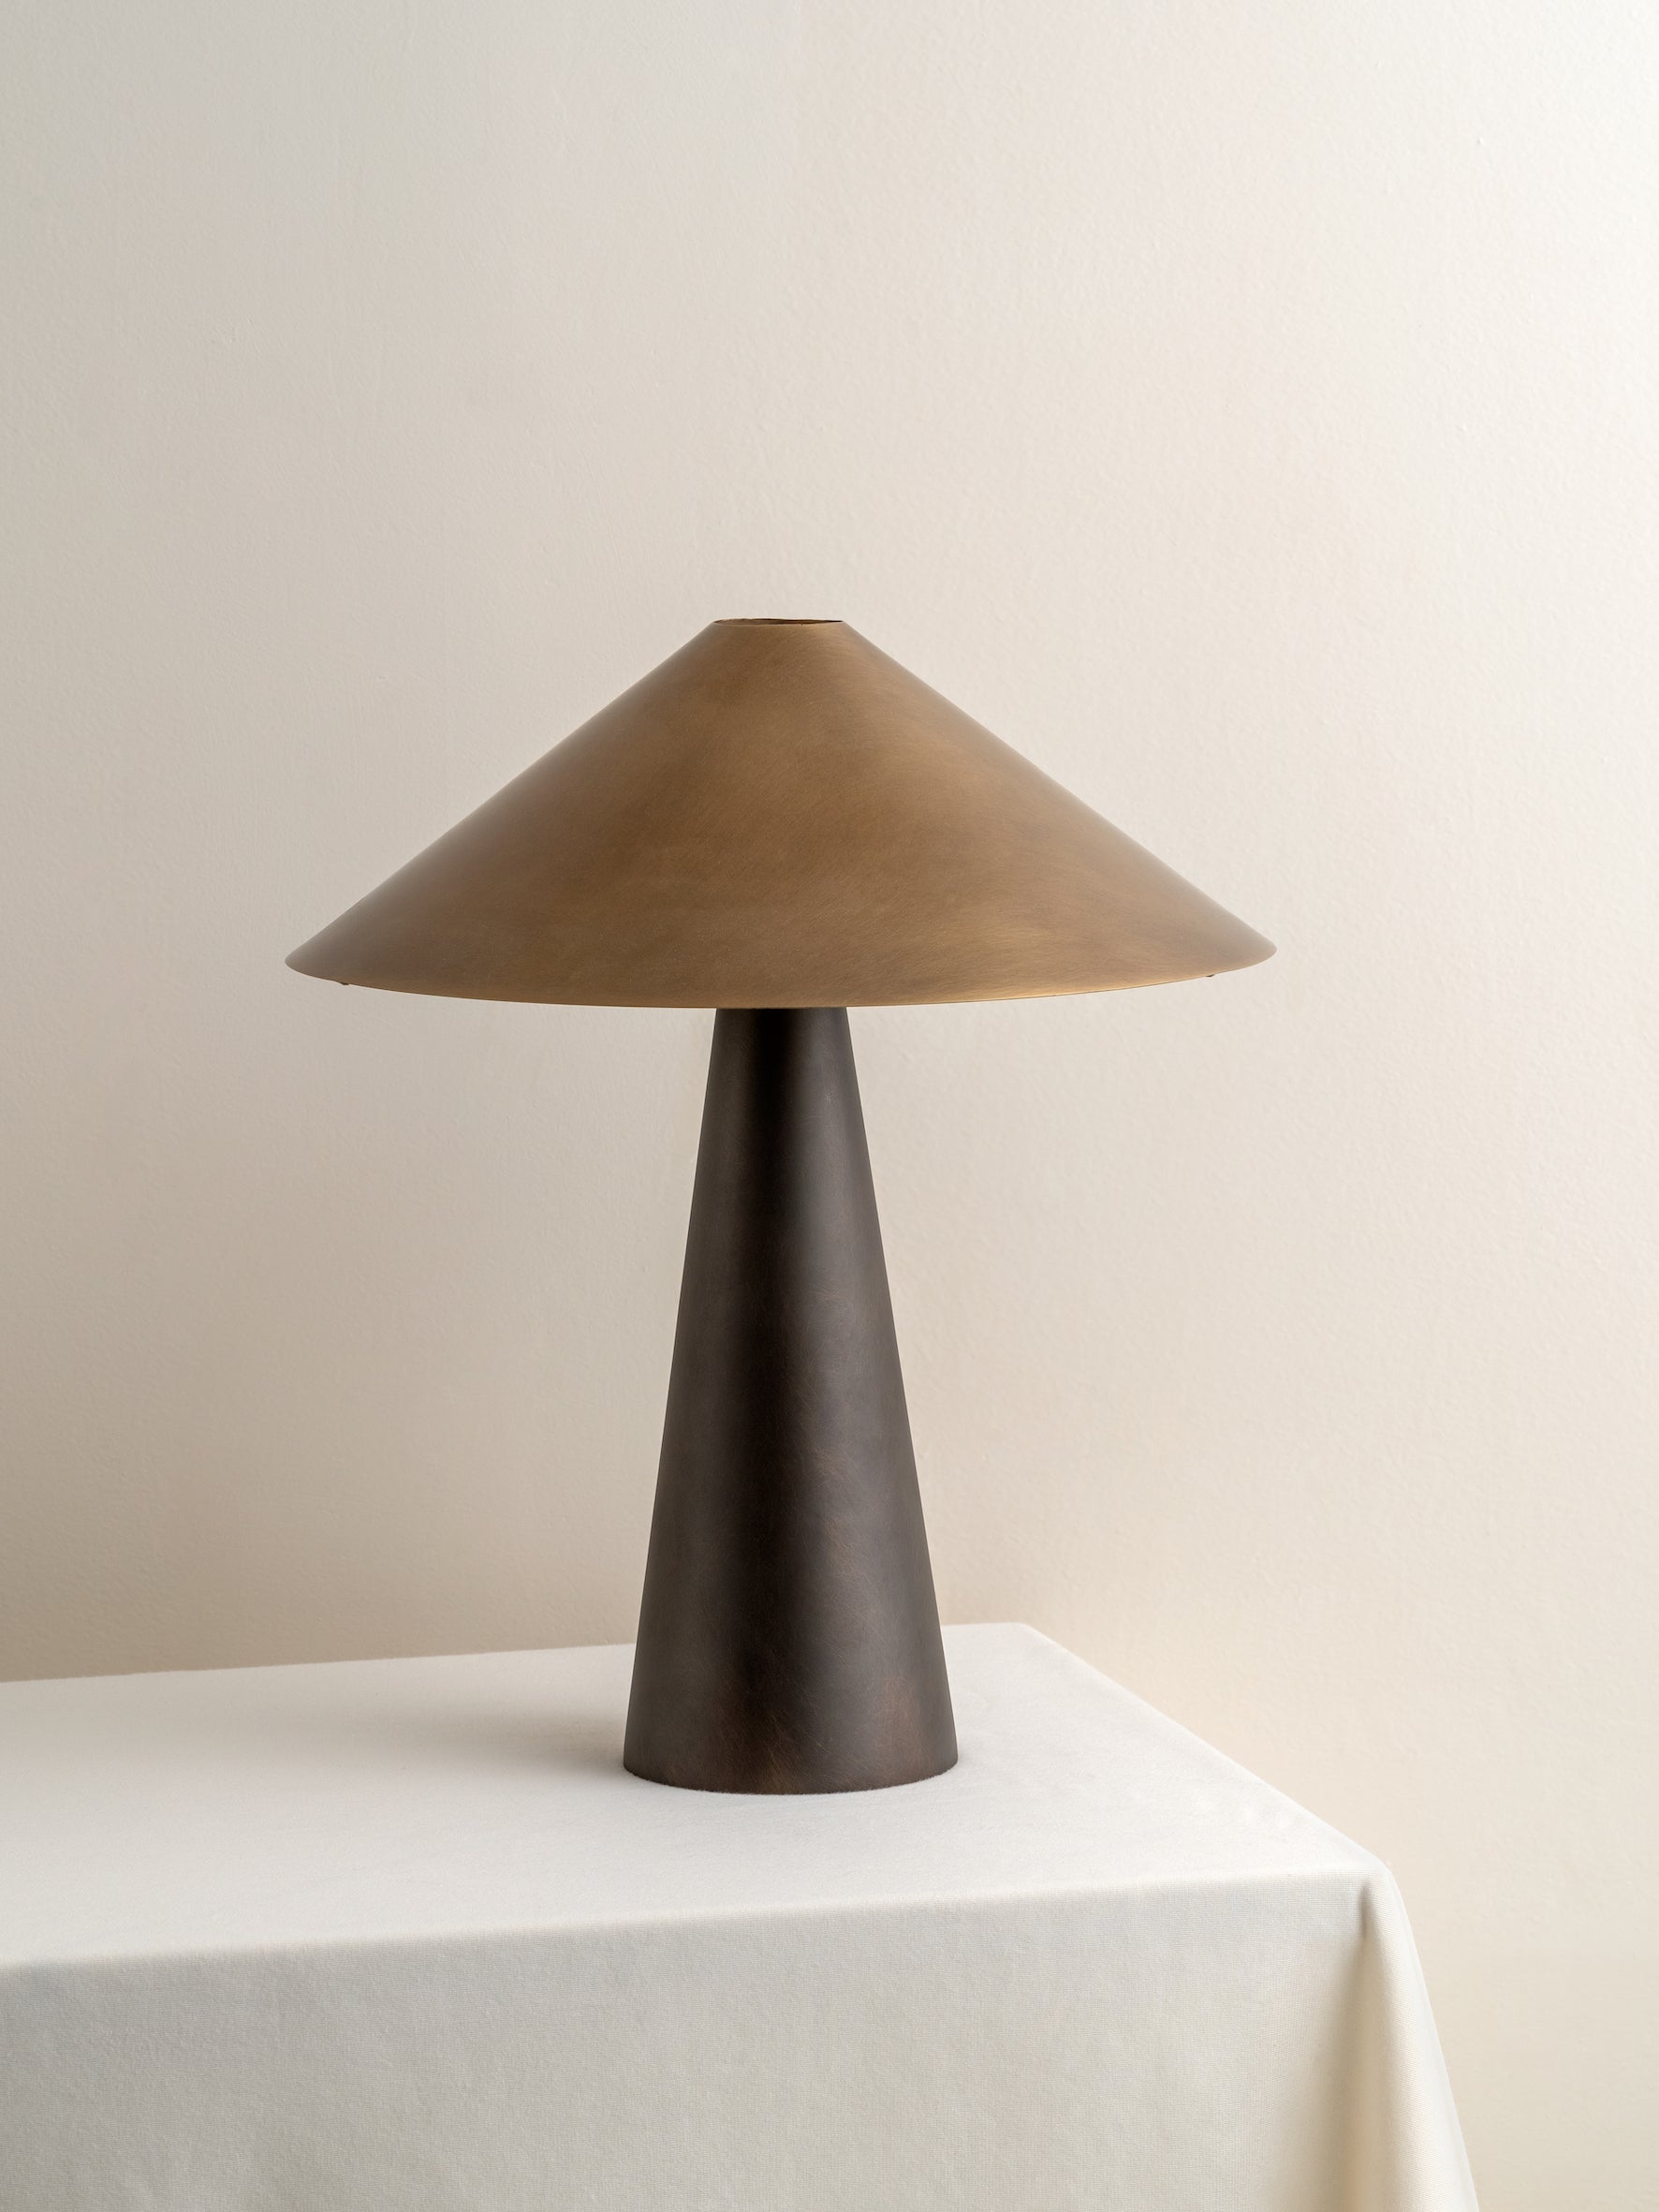 Orta - aged brass and bronze cone table lamp | Table Lamp | Lights & Lamps Inc | Modern Affordable Designer Lighting | USA